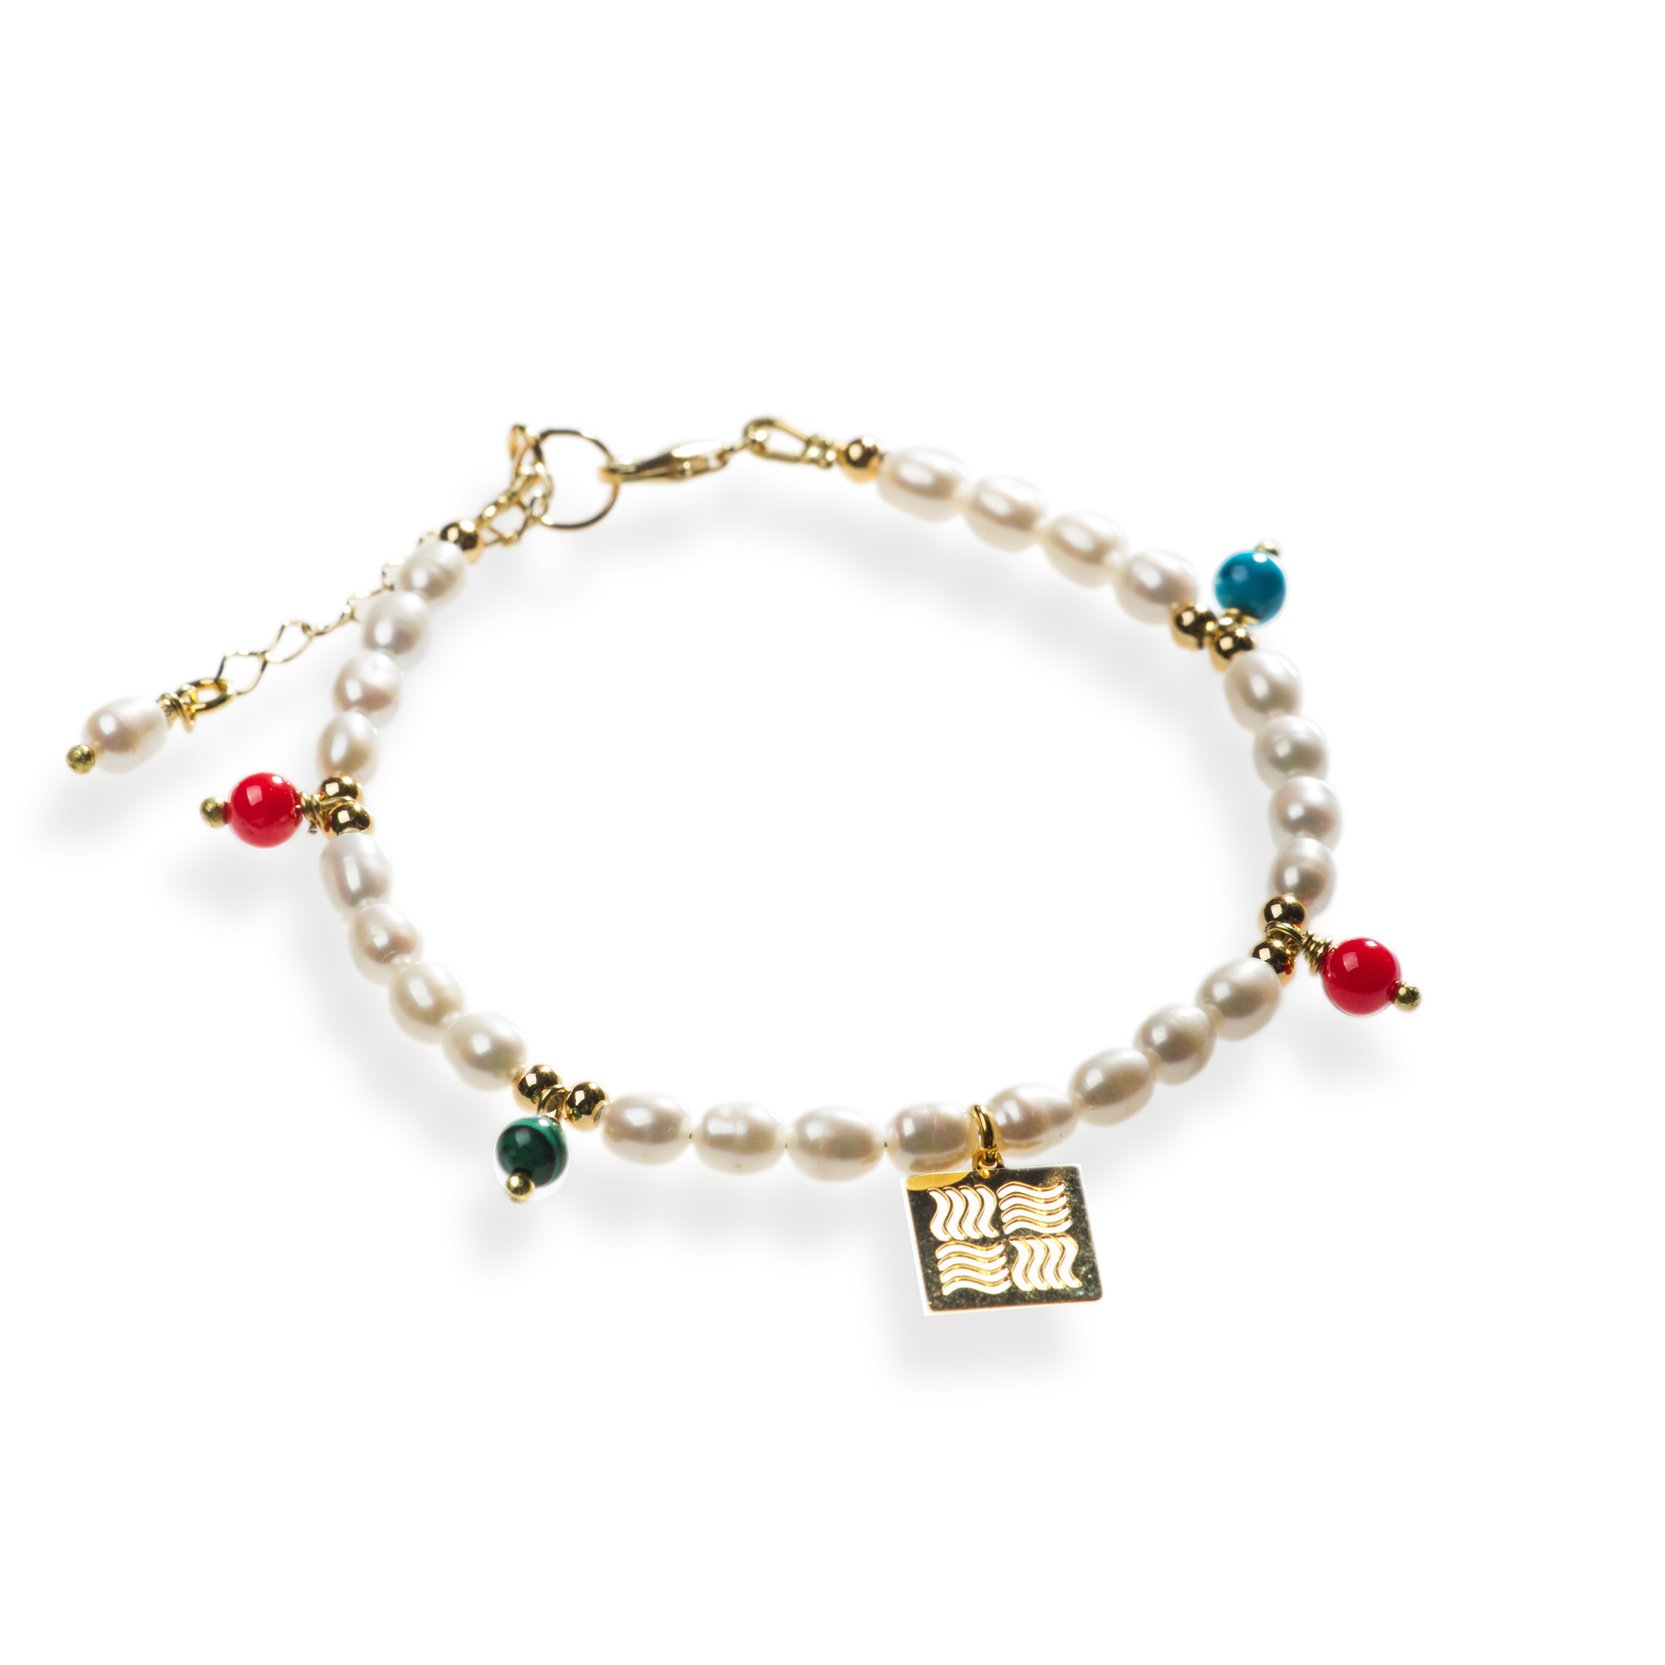 Pearl bracelet with gems and a gold-plated branded pendant.